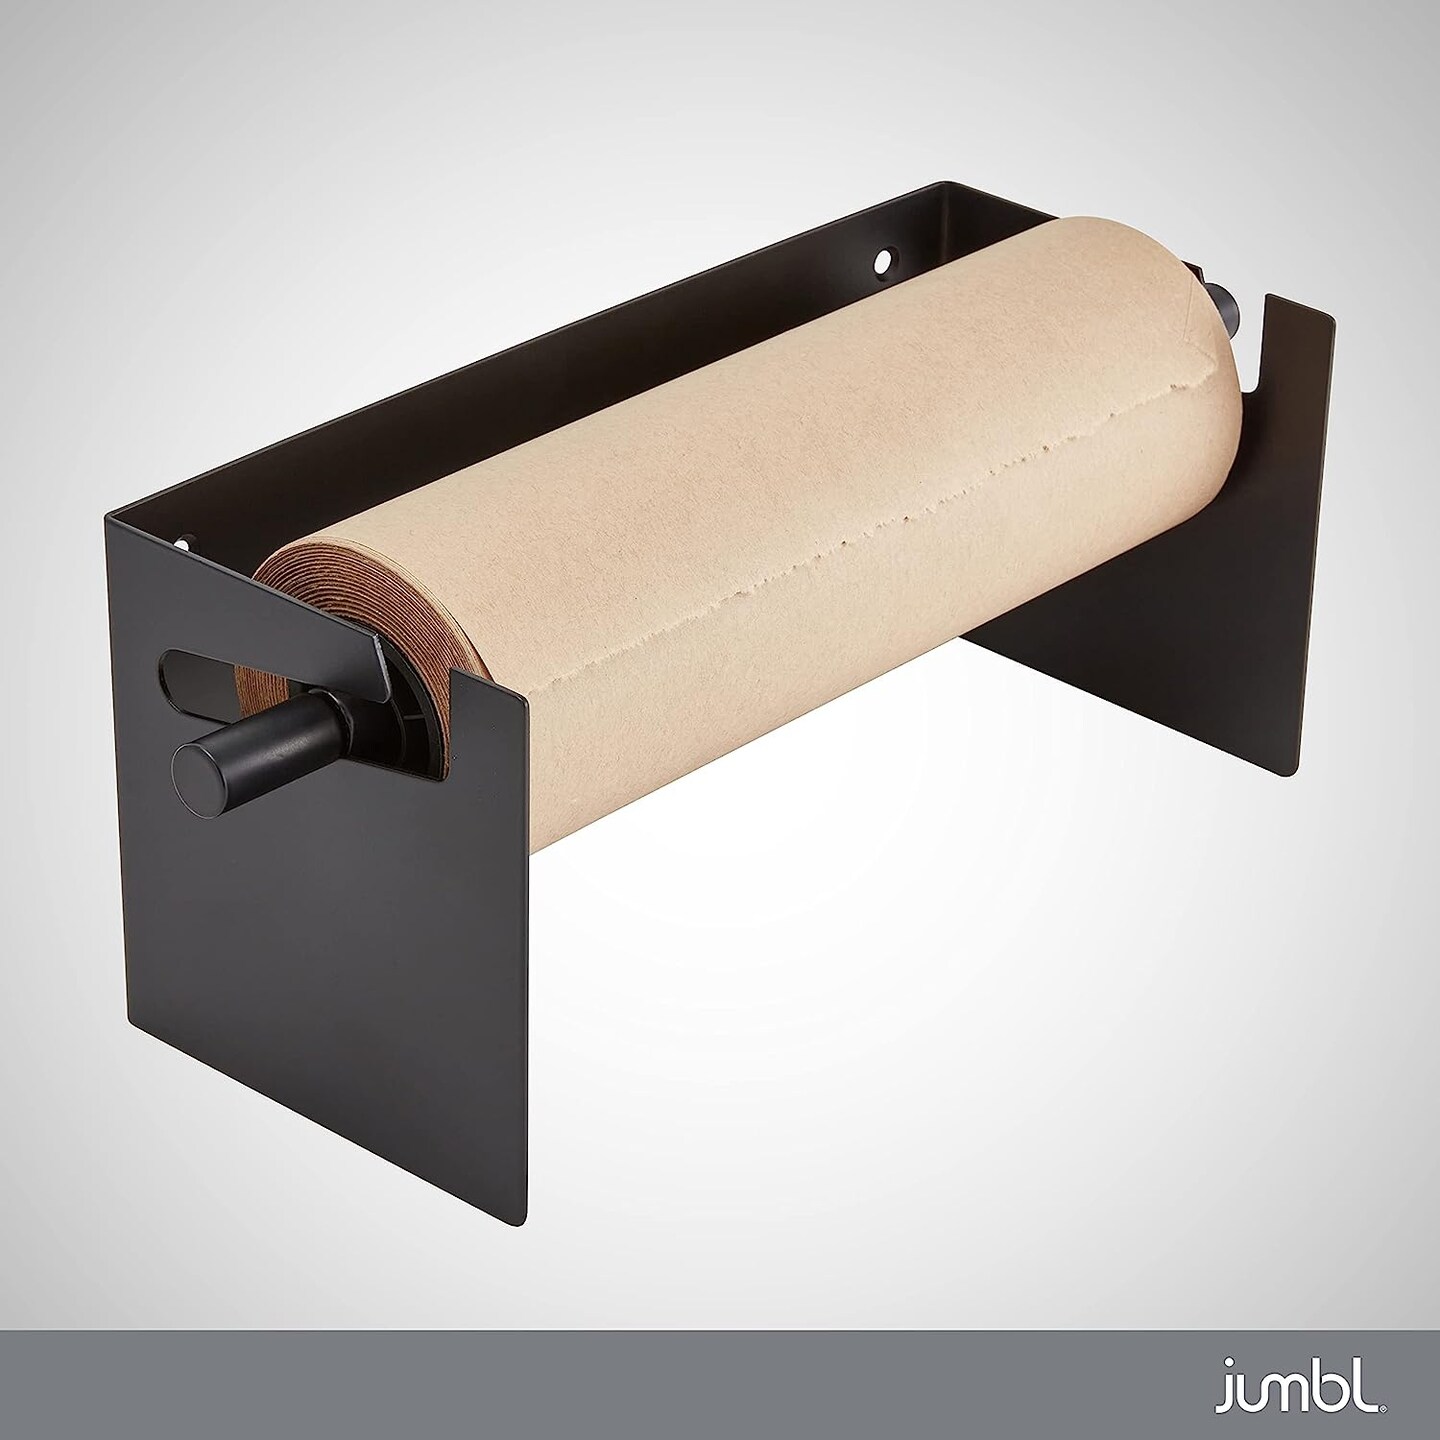  Wall Mounted Kraft Paper Dispenser & Cutter: Includes 50 Meter  Long Kraft Paper Roll - Perfect for To-Do Lists, Daily Specials, Menus and  other Note Taking (8 Inches Wide) : Office Products